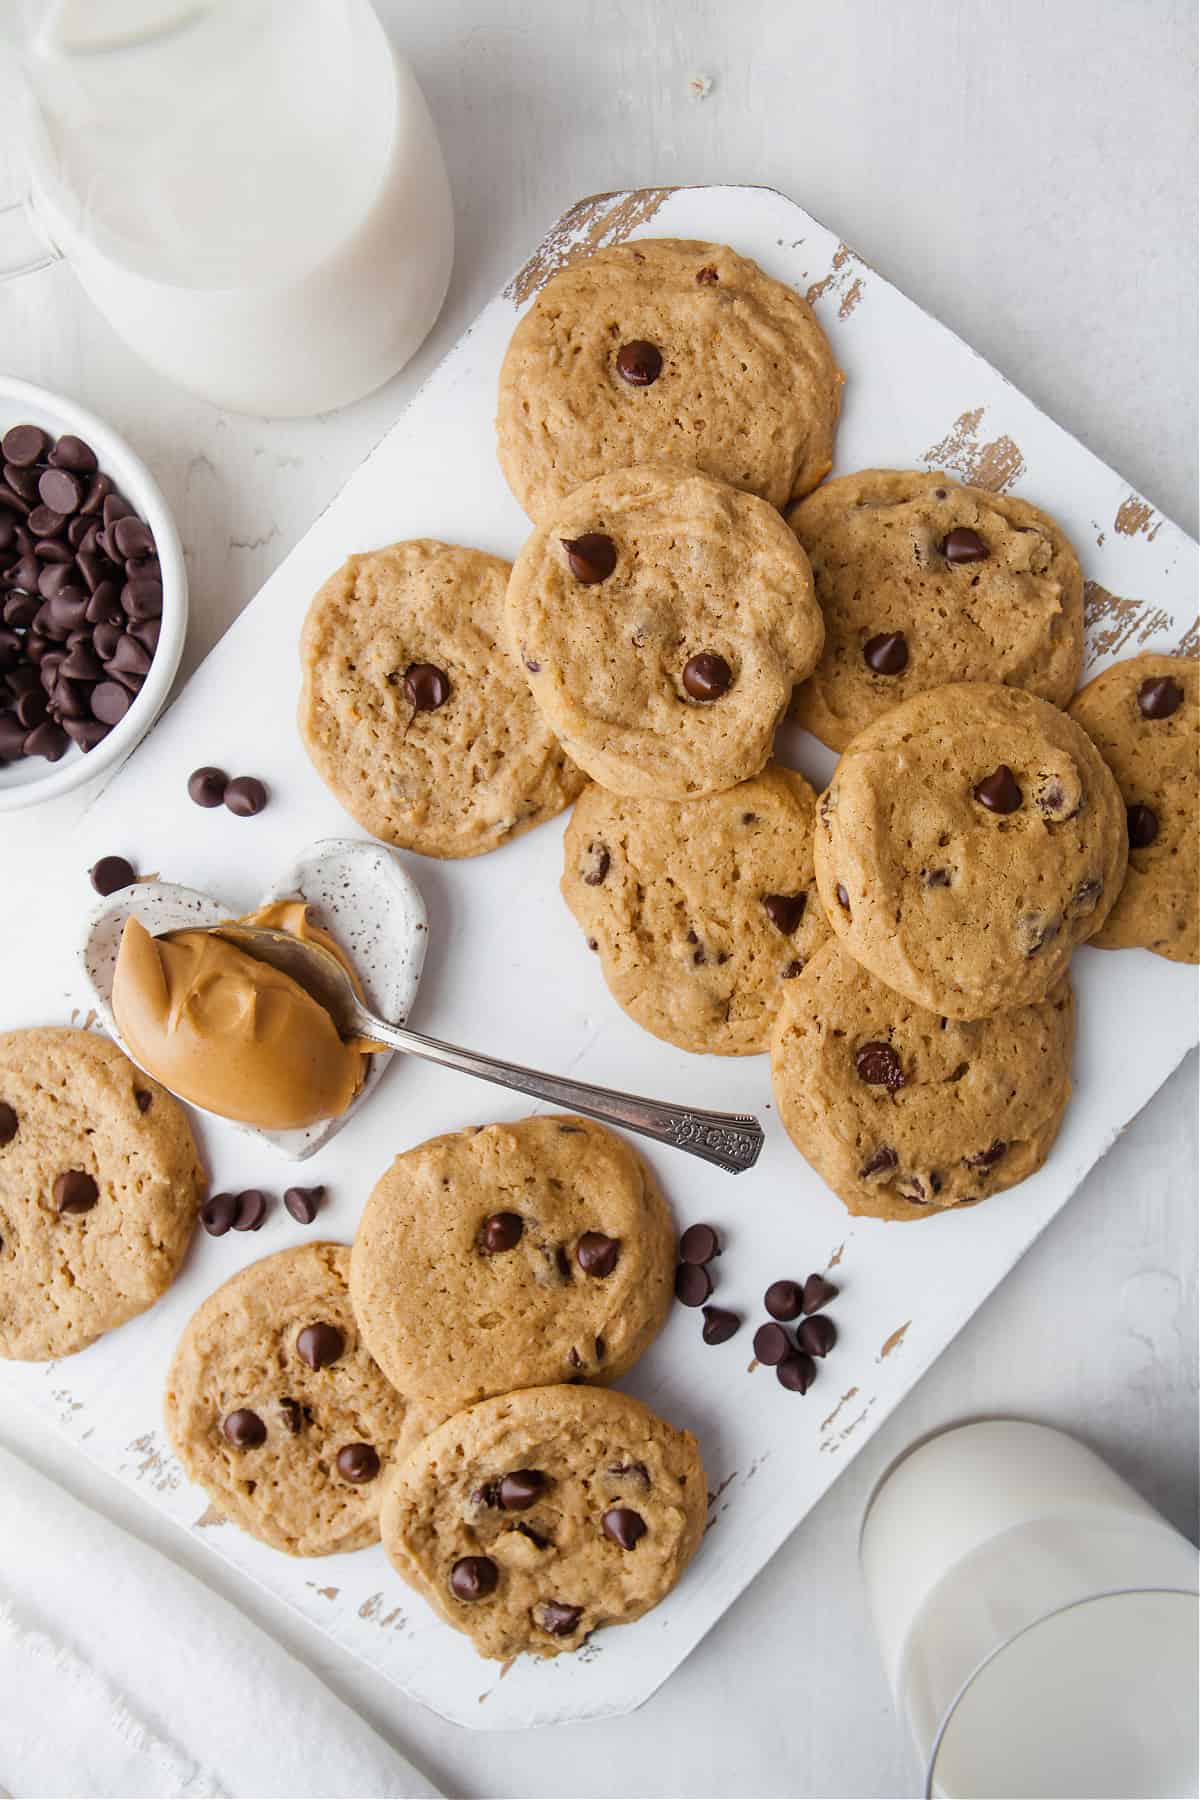 a top view of cookies on a white board next to a bowl of chocolate chips and a glass ofmilk